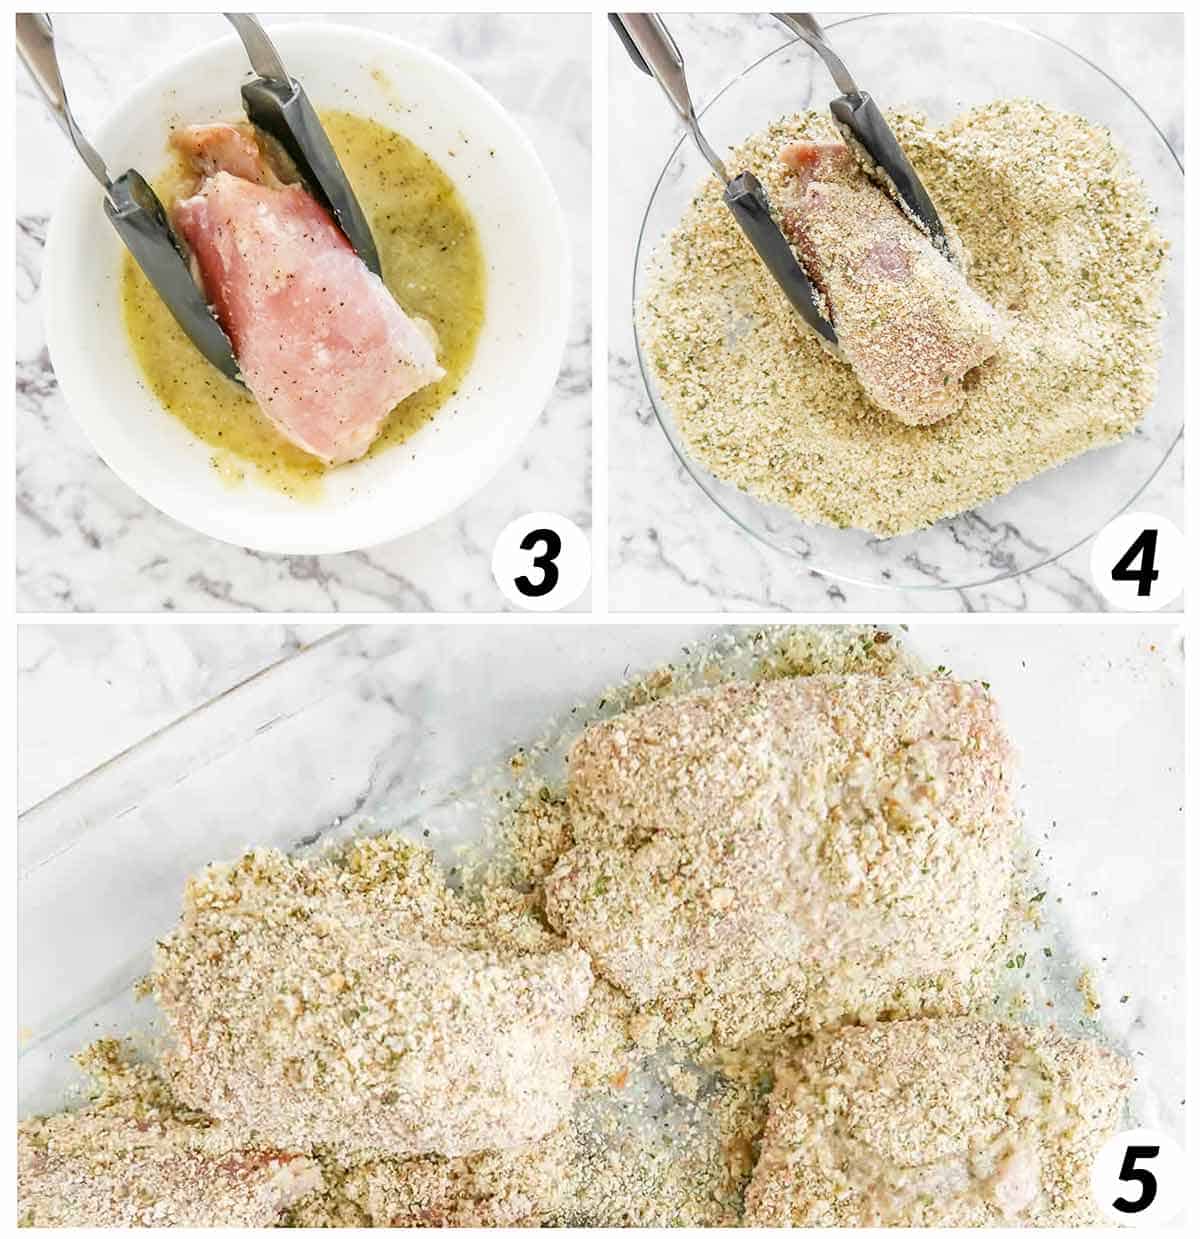 Three panel grid of process shots 3-5 - coating and breading chicken and placing in the oven to bake.